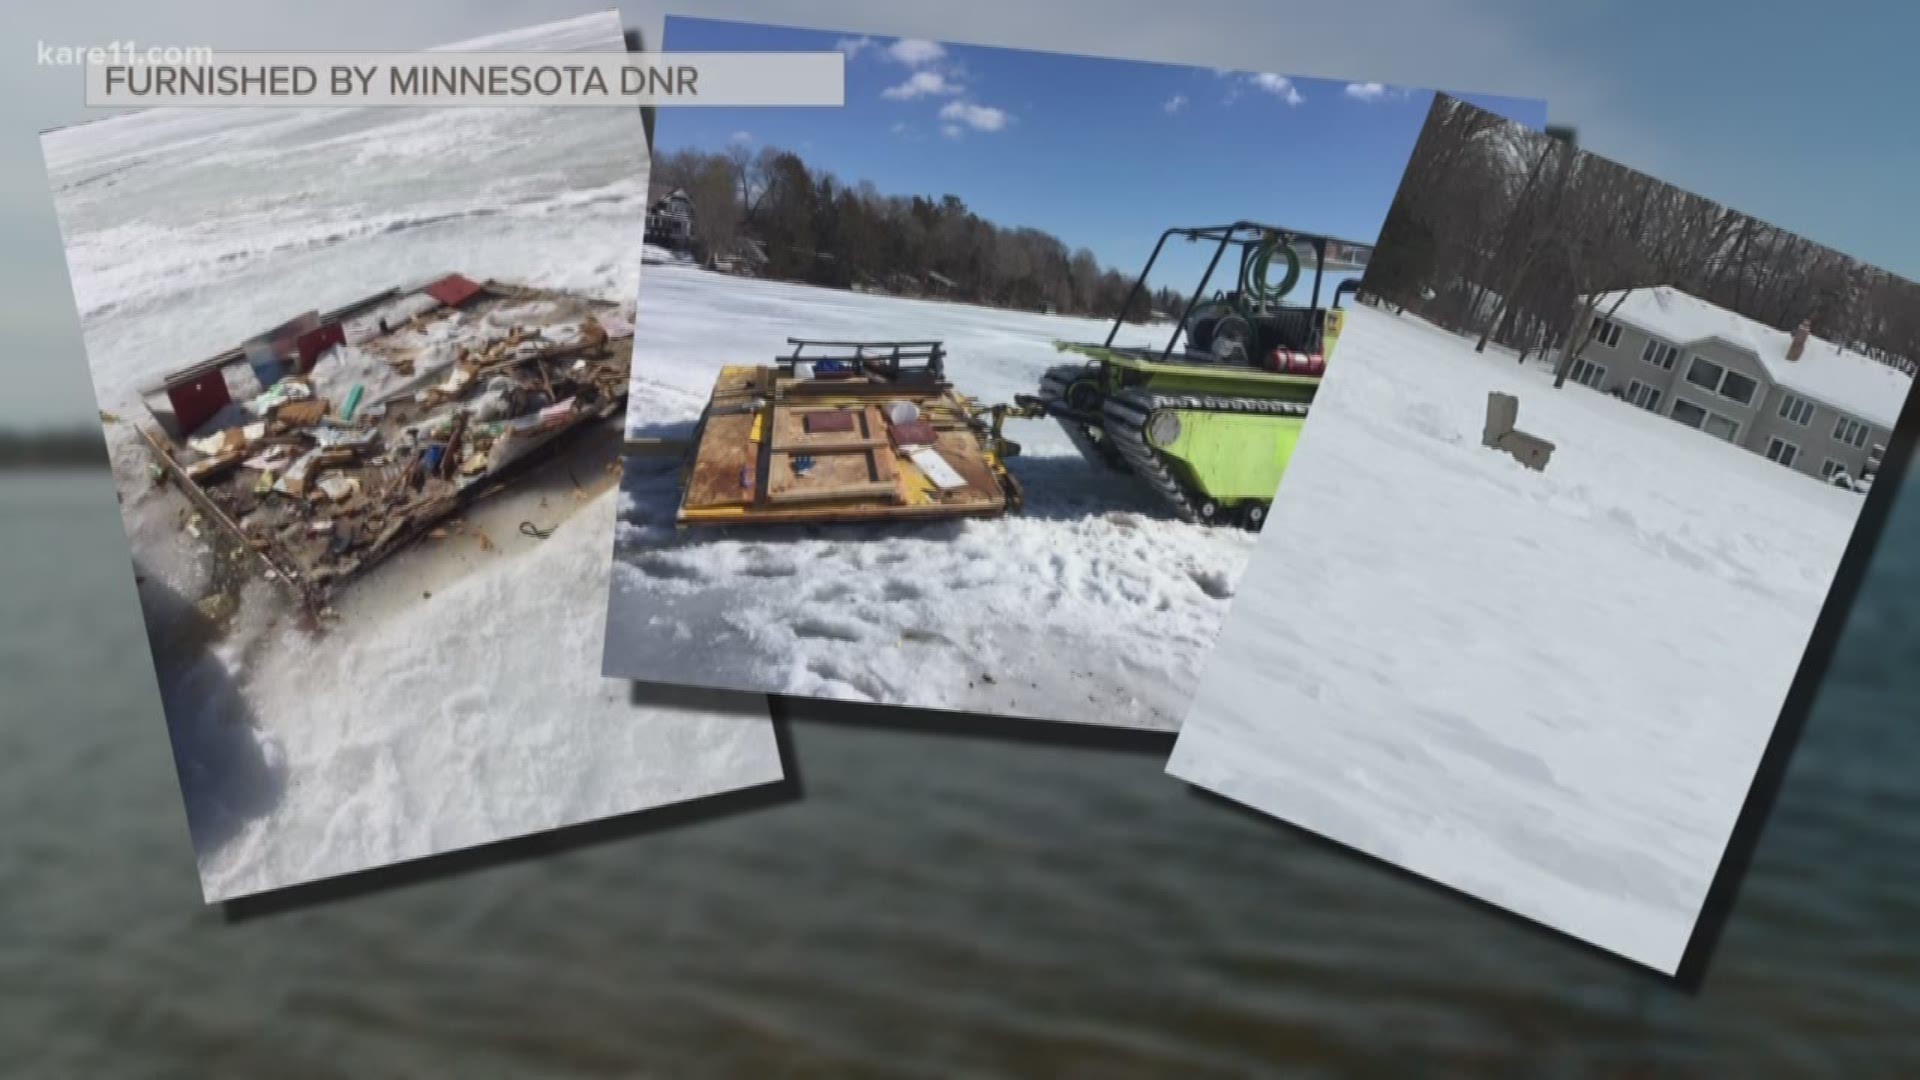 Anglers left their mark on Minnesota's lakes this winter, and not in a good way. DNR officers are finding a mess on the melting ice. https://kare11.tv/2HX2xcI